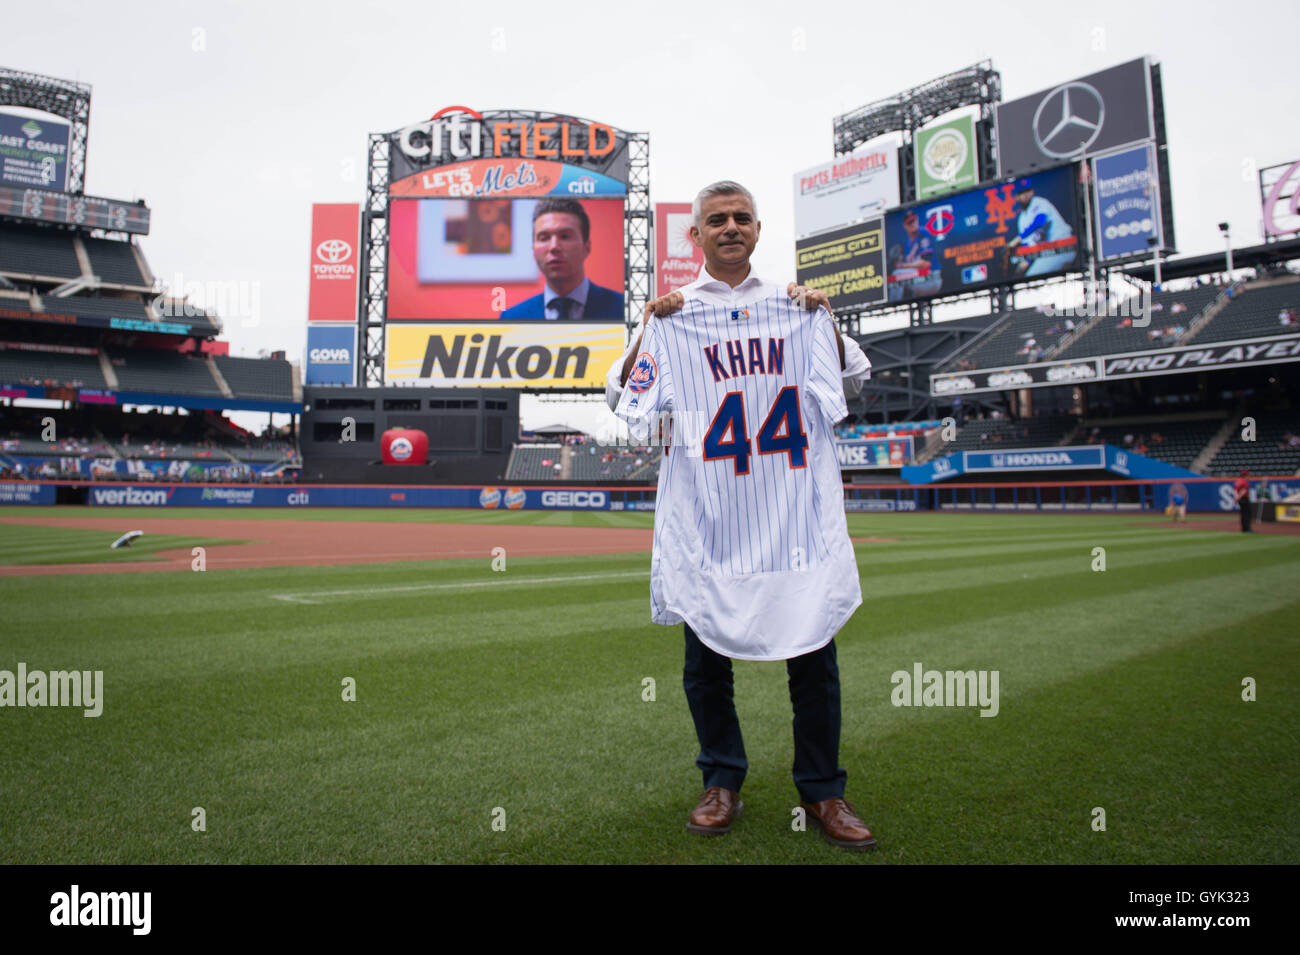 Mayor of London Sadiq Khan holds a shirt with his name on as he arrives to pitch the first ball at a baseball game between the New York Mets and Minnesota Twins at Citi Field in New York City (NYC) during a three day visit to the US capital as part of his visit to North America. Stock Photo